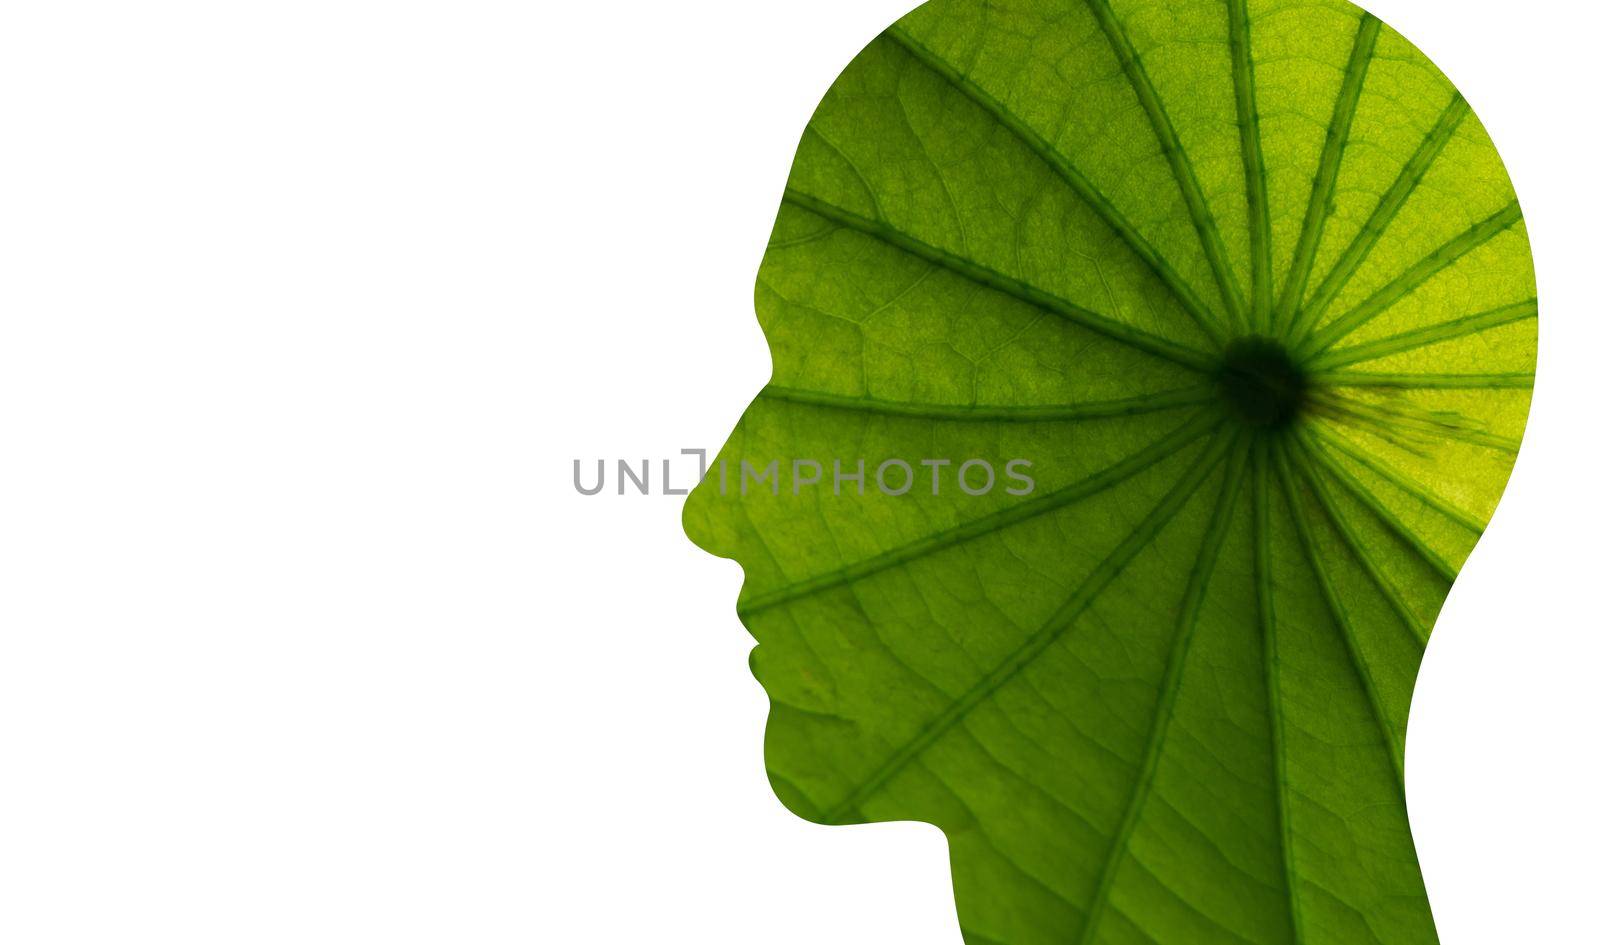 Face with leaf texture silhouette isolated on white background. illustration.